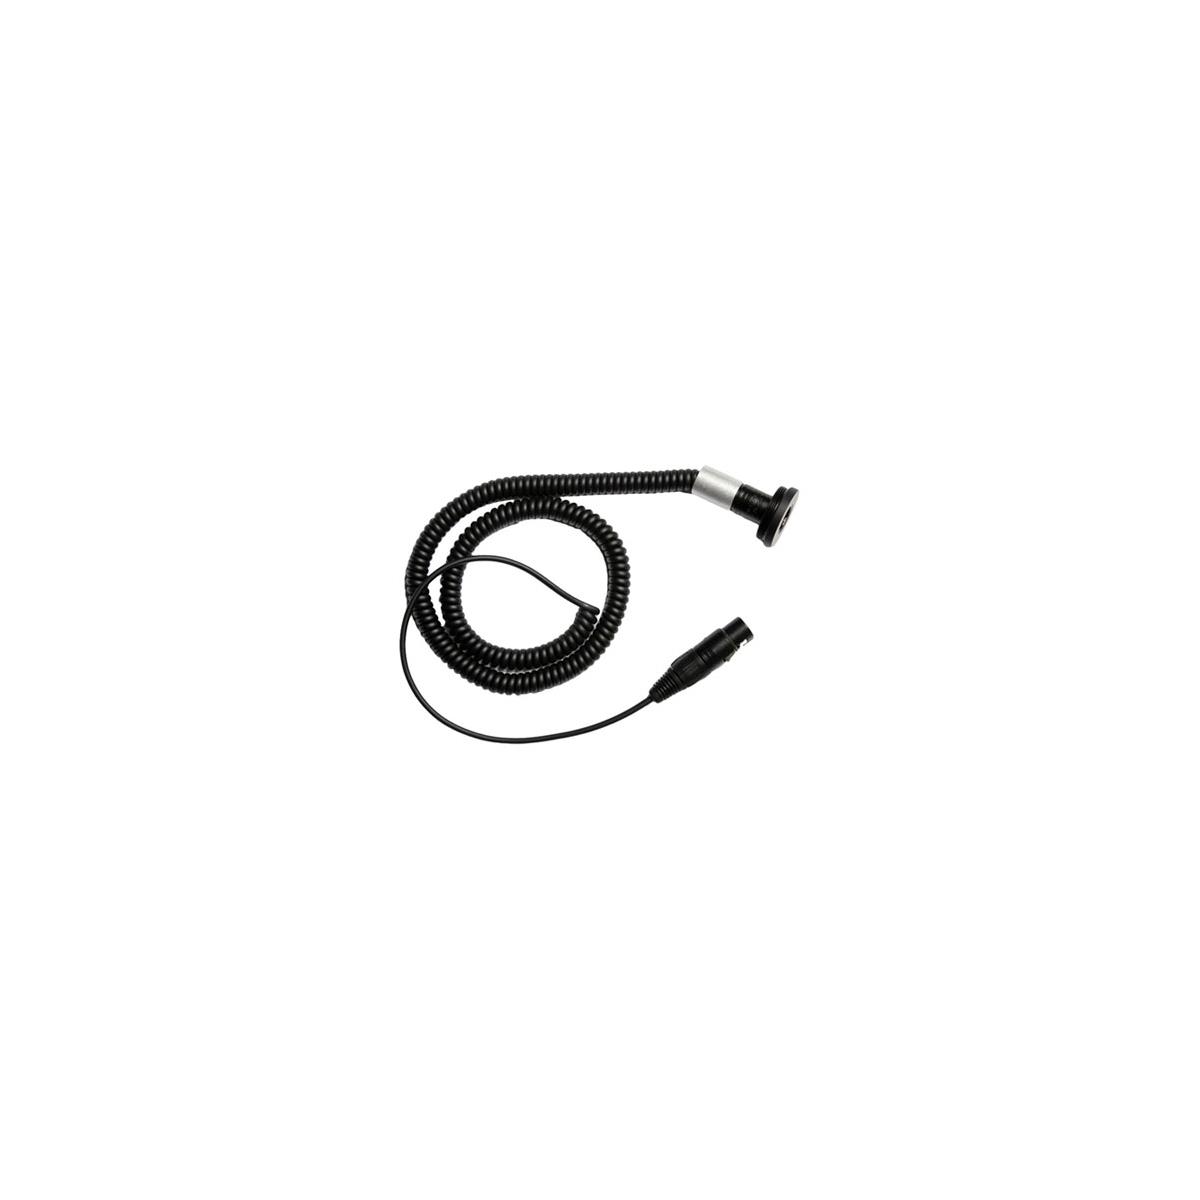 Image of PSC Coil Cable Kit for Small Boom Pole